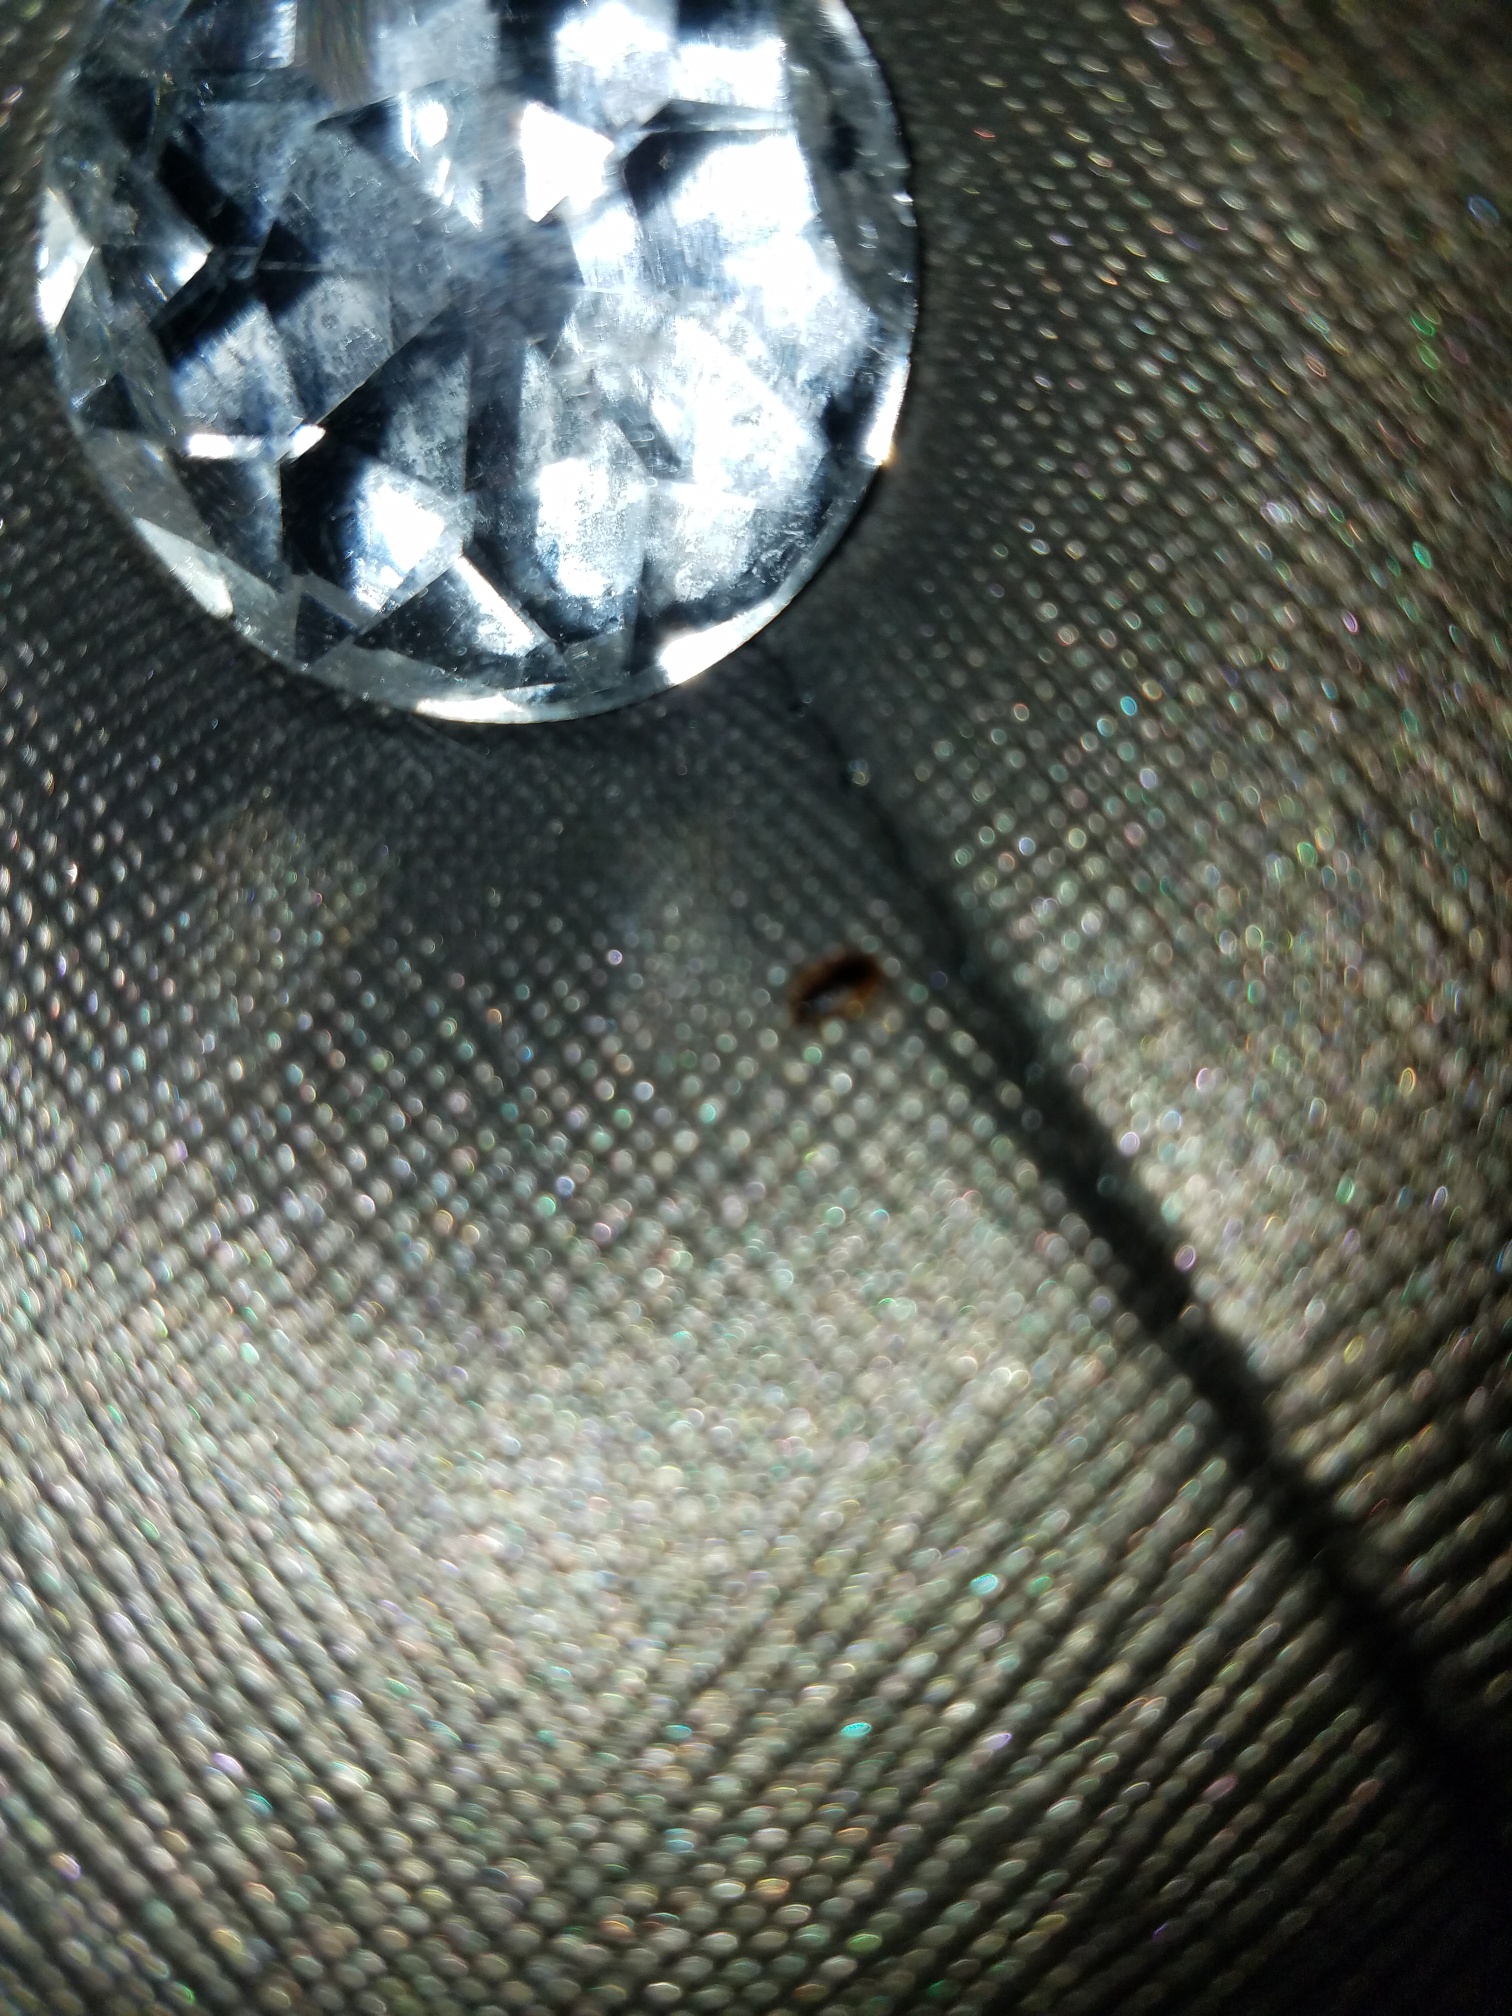 Bed bug trying to get back under button